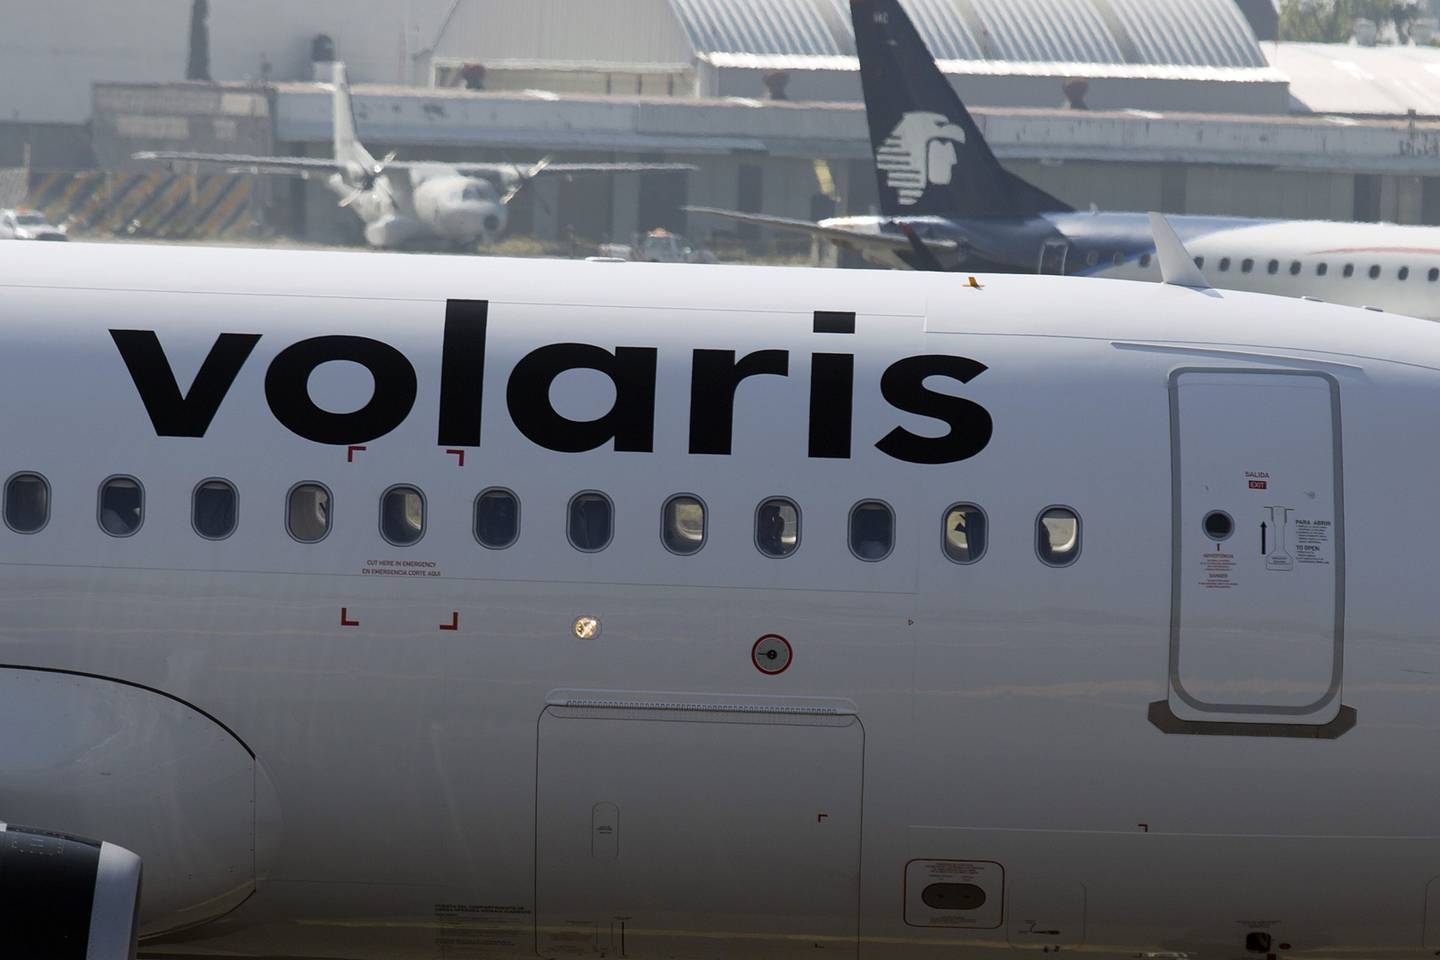 The tail section of a Grupo Aeromexico SAB jet is seen behind a Volaris plane at Benito Juarez International Airport in Mexico City, Mexico, on Tuesday, Sept. 17, 2013. Volaris, the low-cost Mexican airline backed by U.S. private-equity firm Indigo Partners LLC, is touting market-share growth to potential investors in its initial share sale as the value of its public peer languishes. Photographer: Susana Gonzalez/Bloomberg